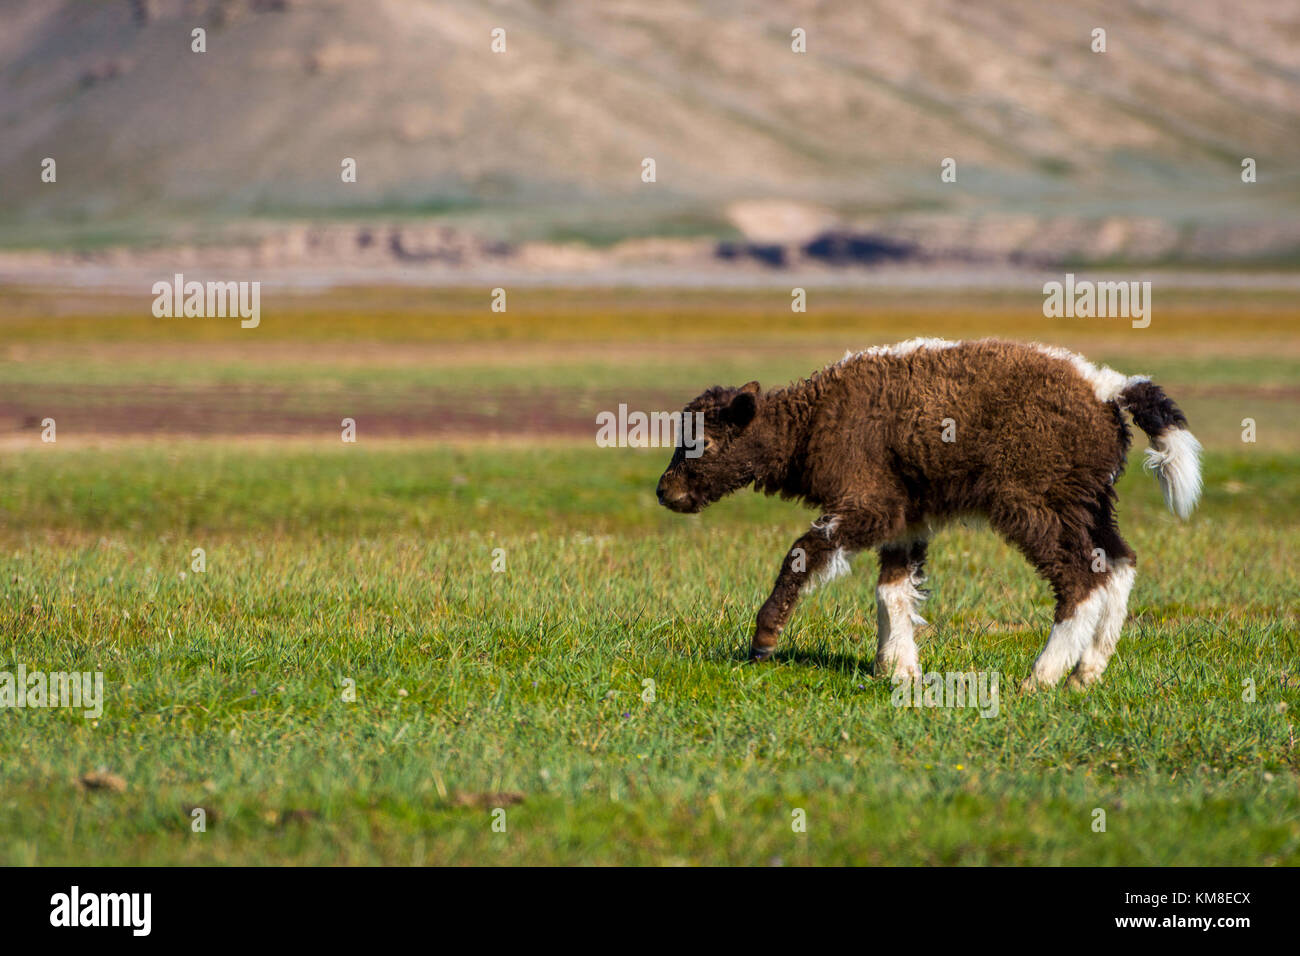 Small brown and white baby yak in the pasture Stock Photo